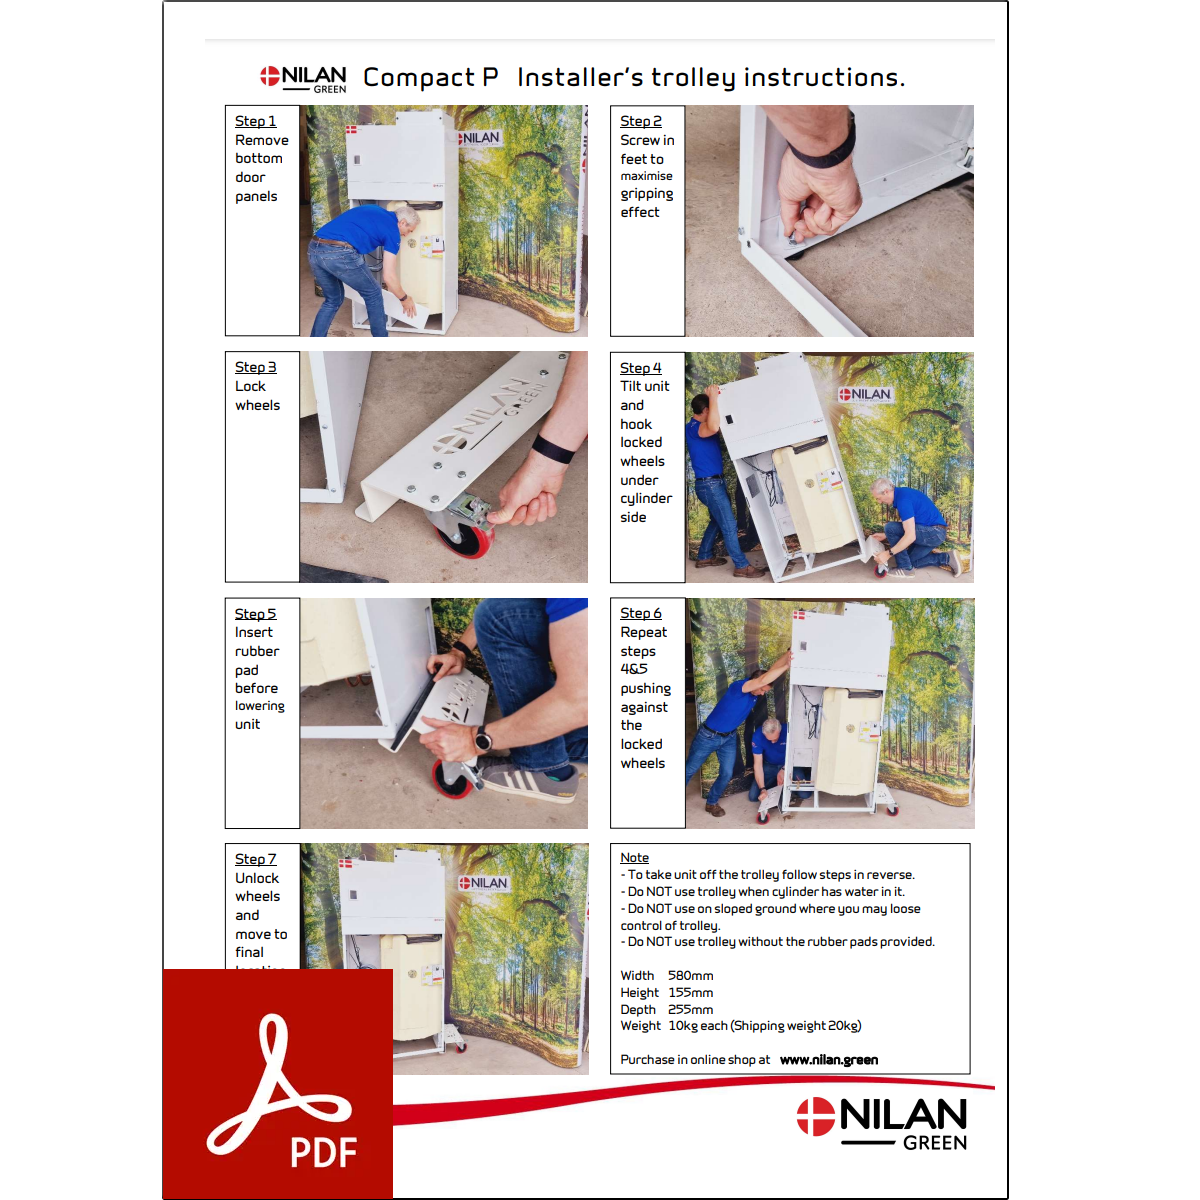 Nilan Compact P Installers trolley instructions